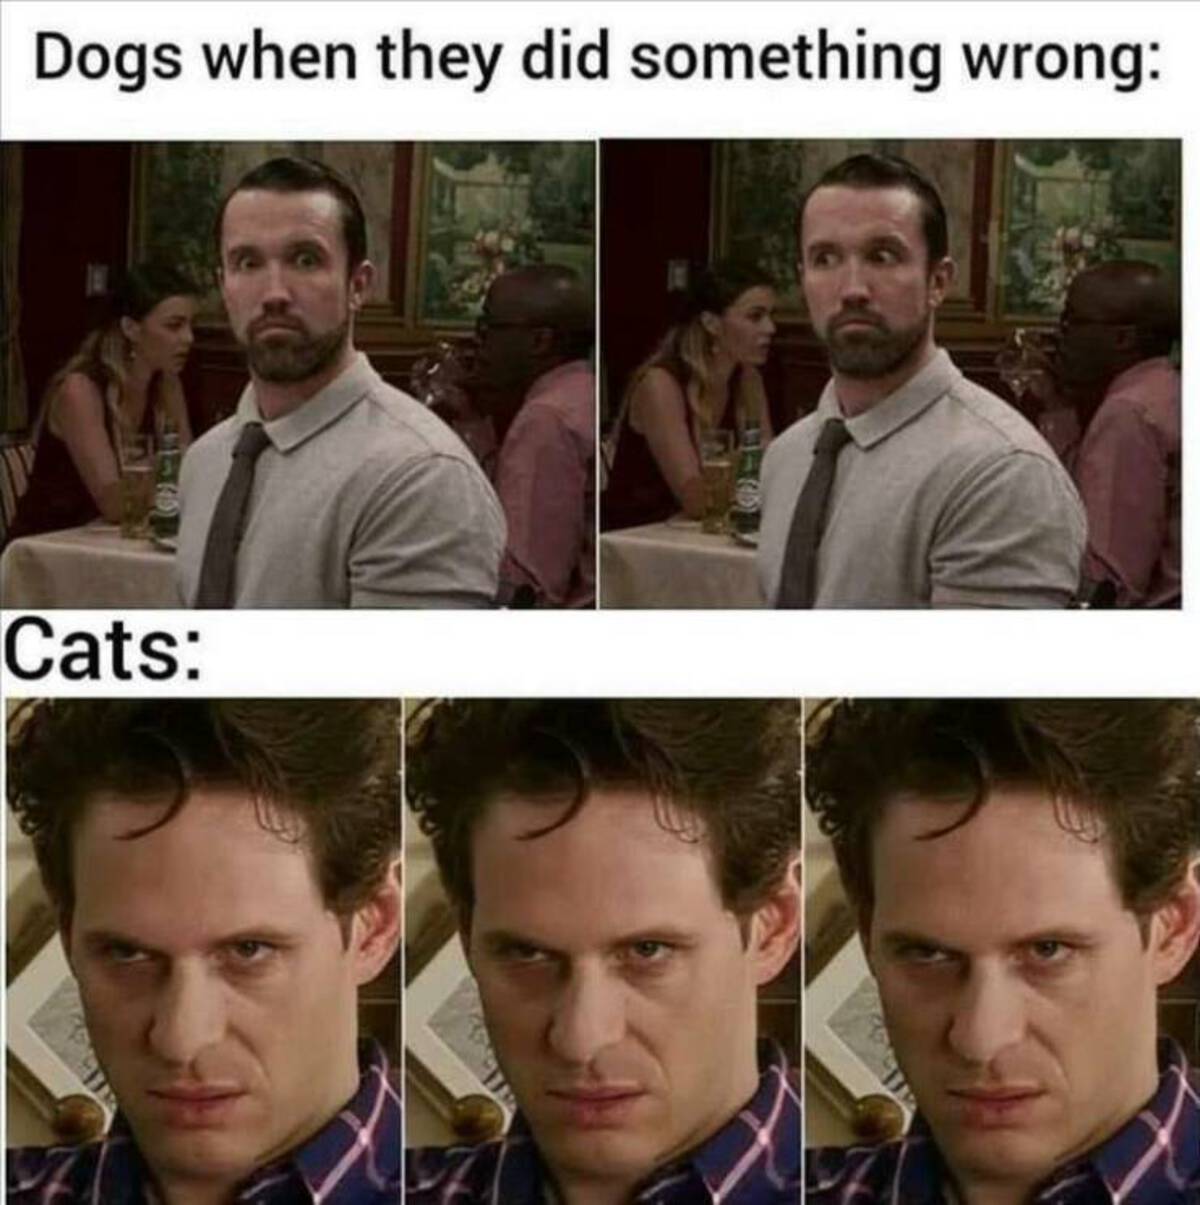 cats when they do something wrong - Dogs when they did something wrong Cats